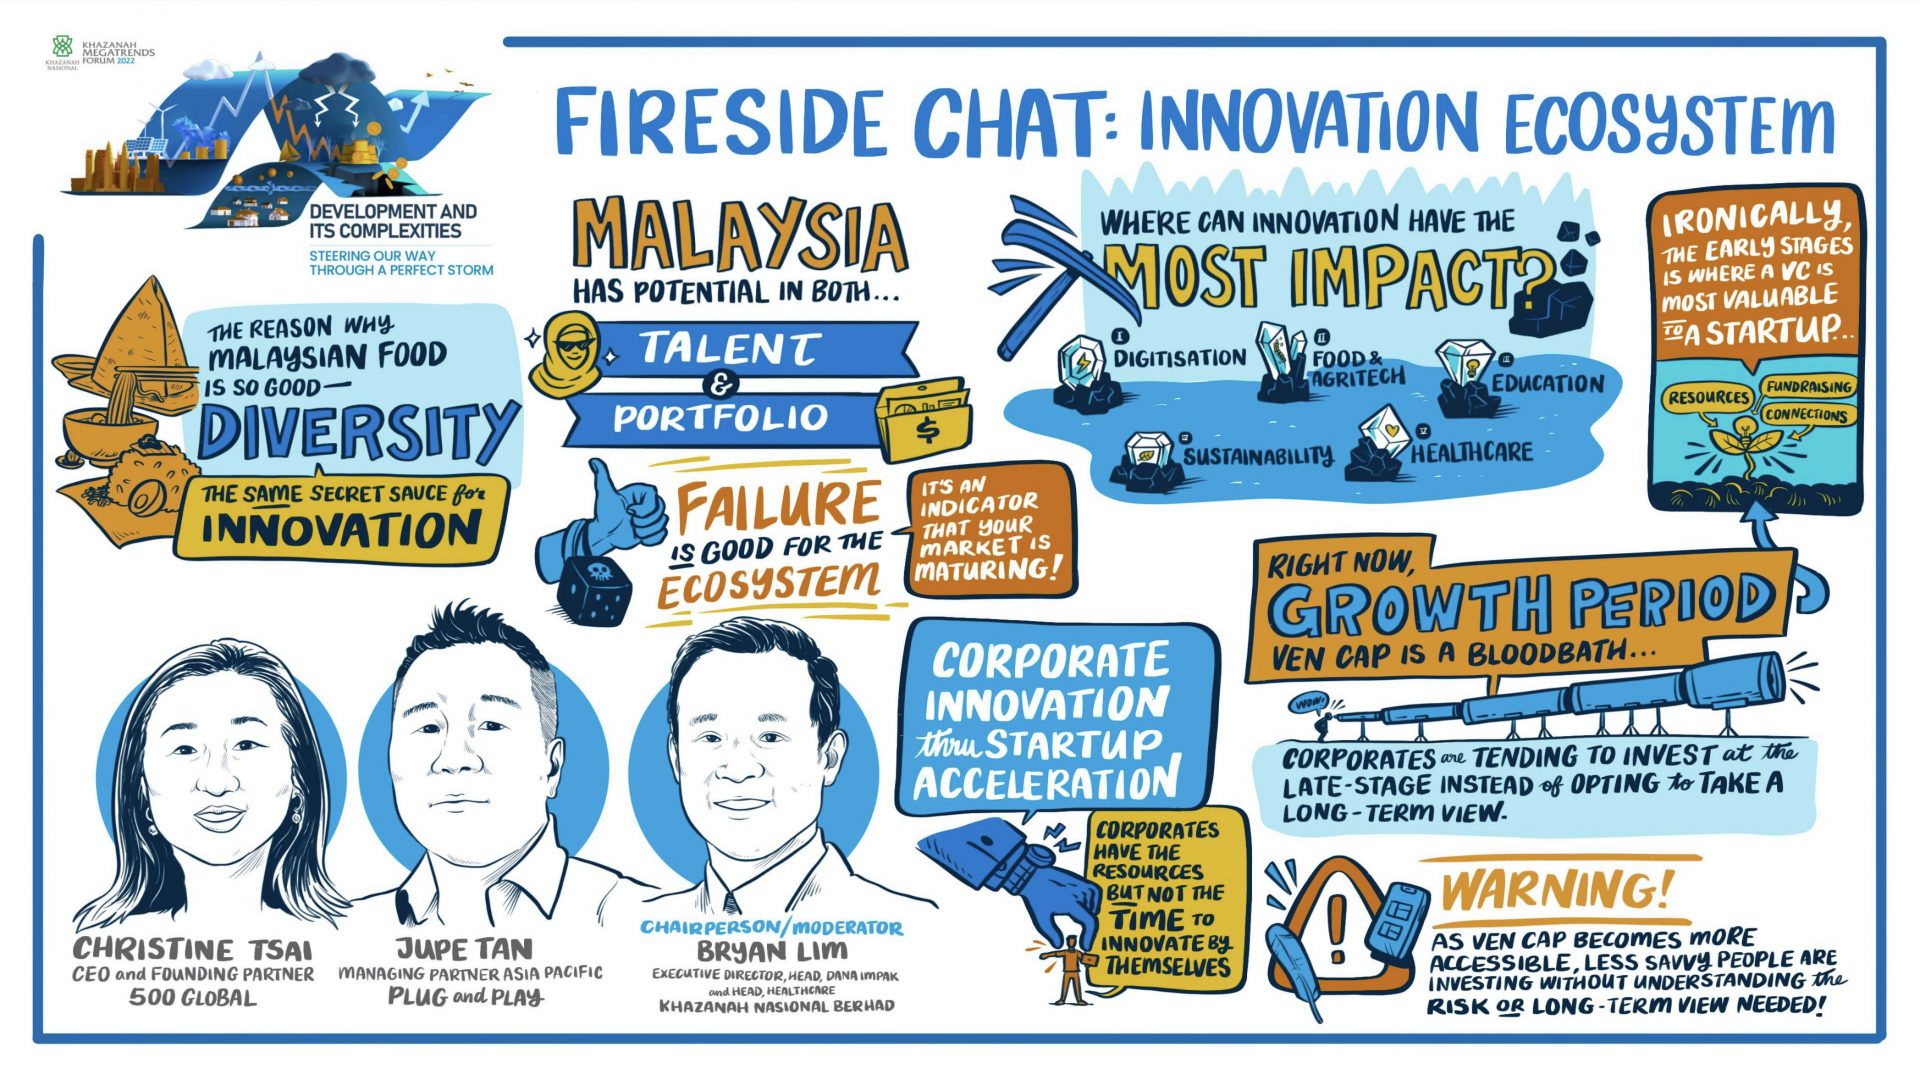 Daily Markup #617: Christine Tsai joins Khazanah to explore where technology can unlock the greatest impact, and the role of key players for innovation